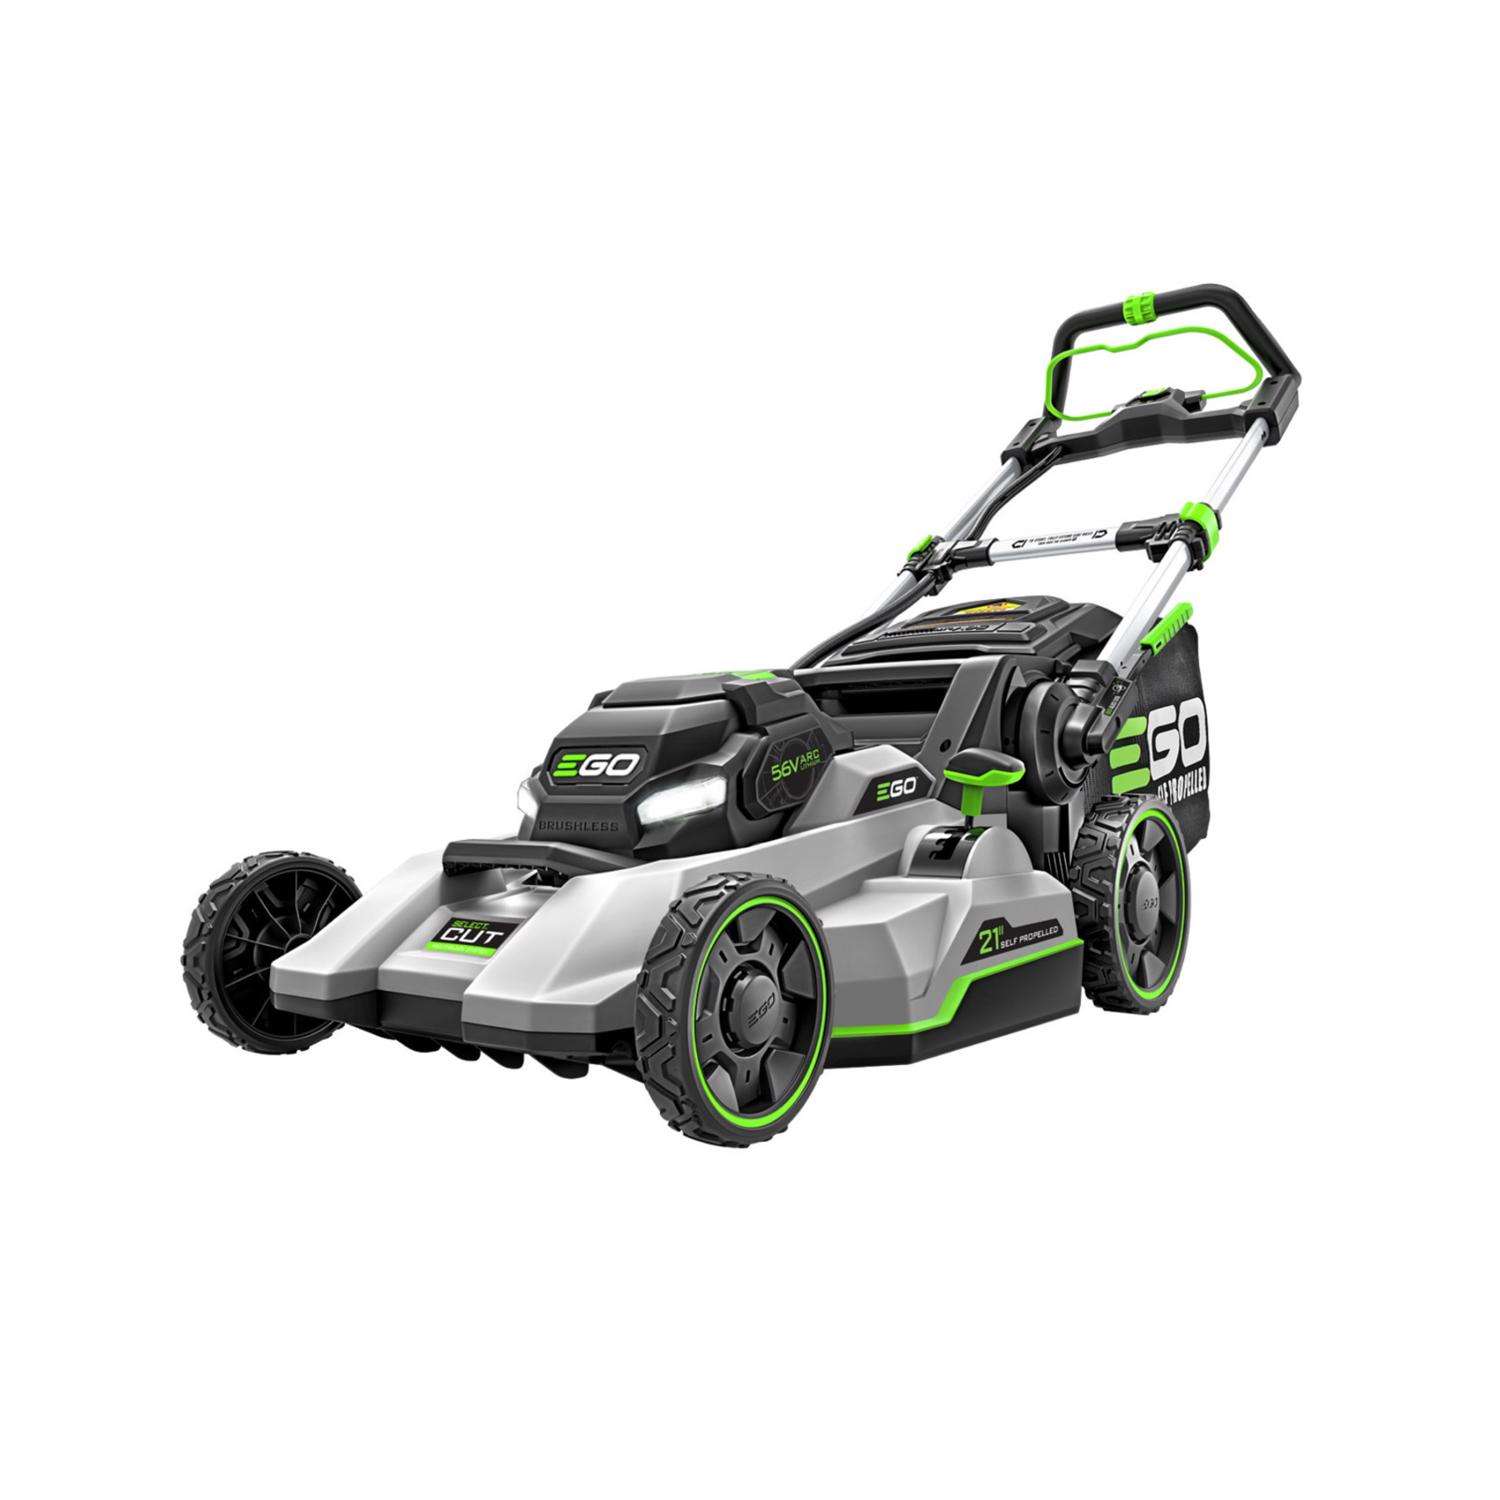 acehardware.com | EGO Power+ LM2135SP 21 in. 56 V Battery Self-Propelled Lawn Mower Kit (Battery & Charger)